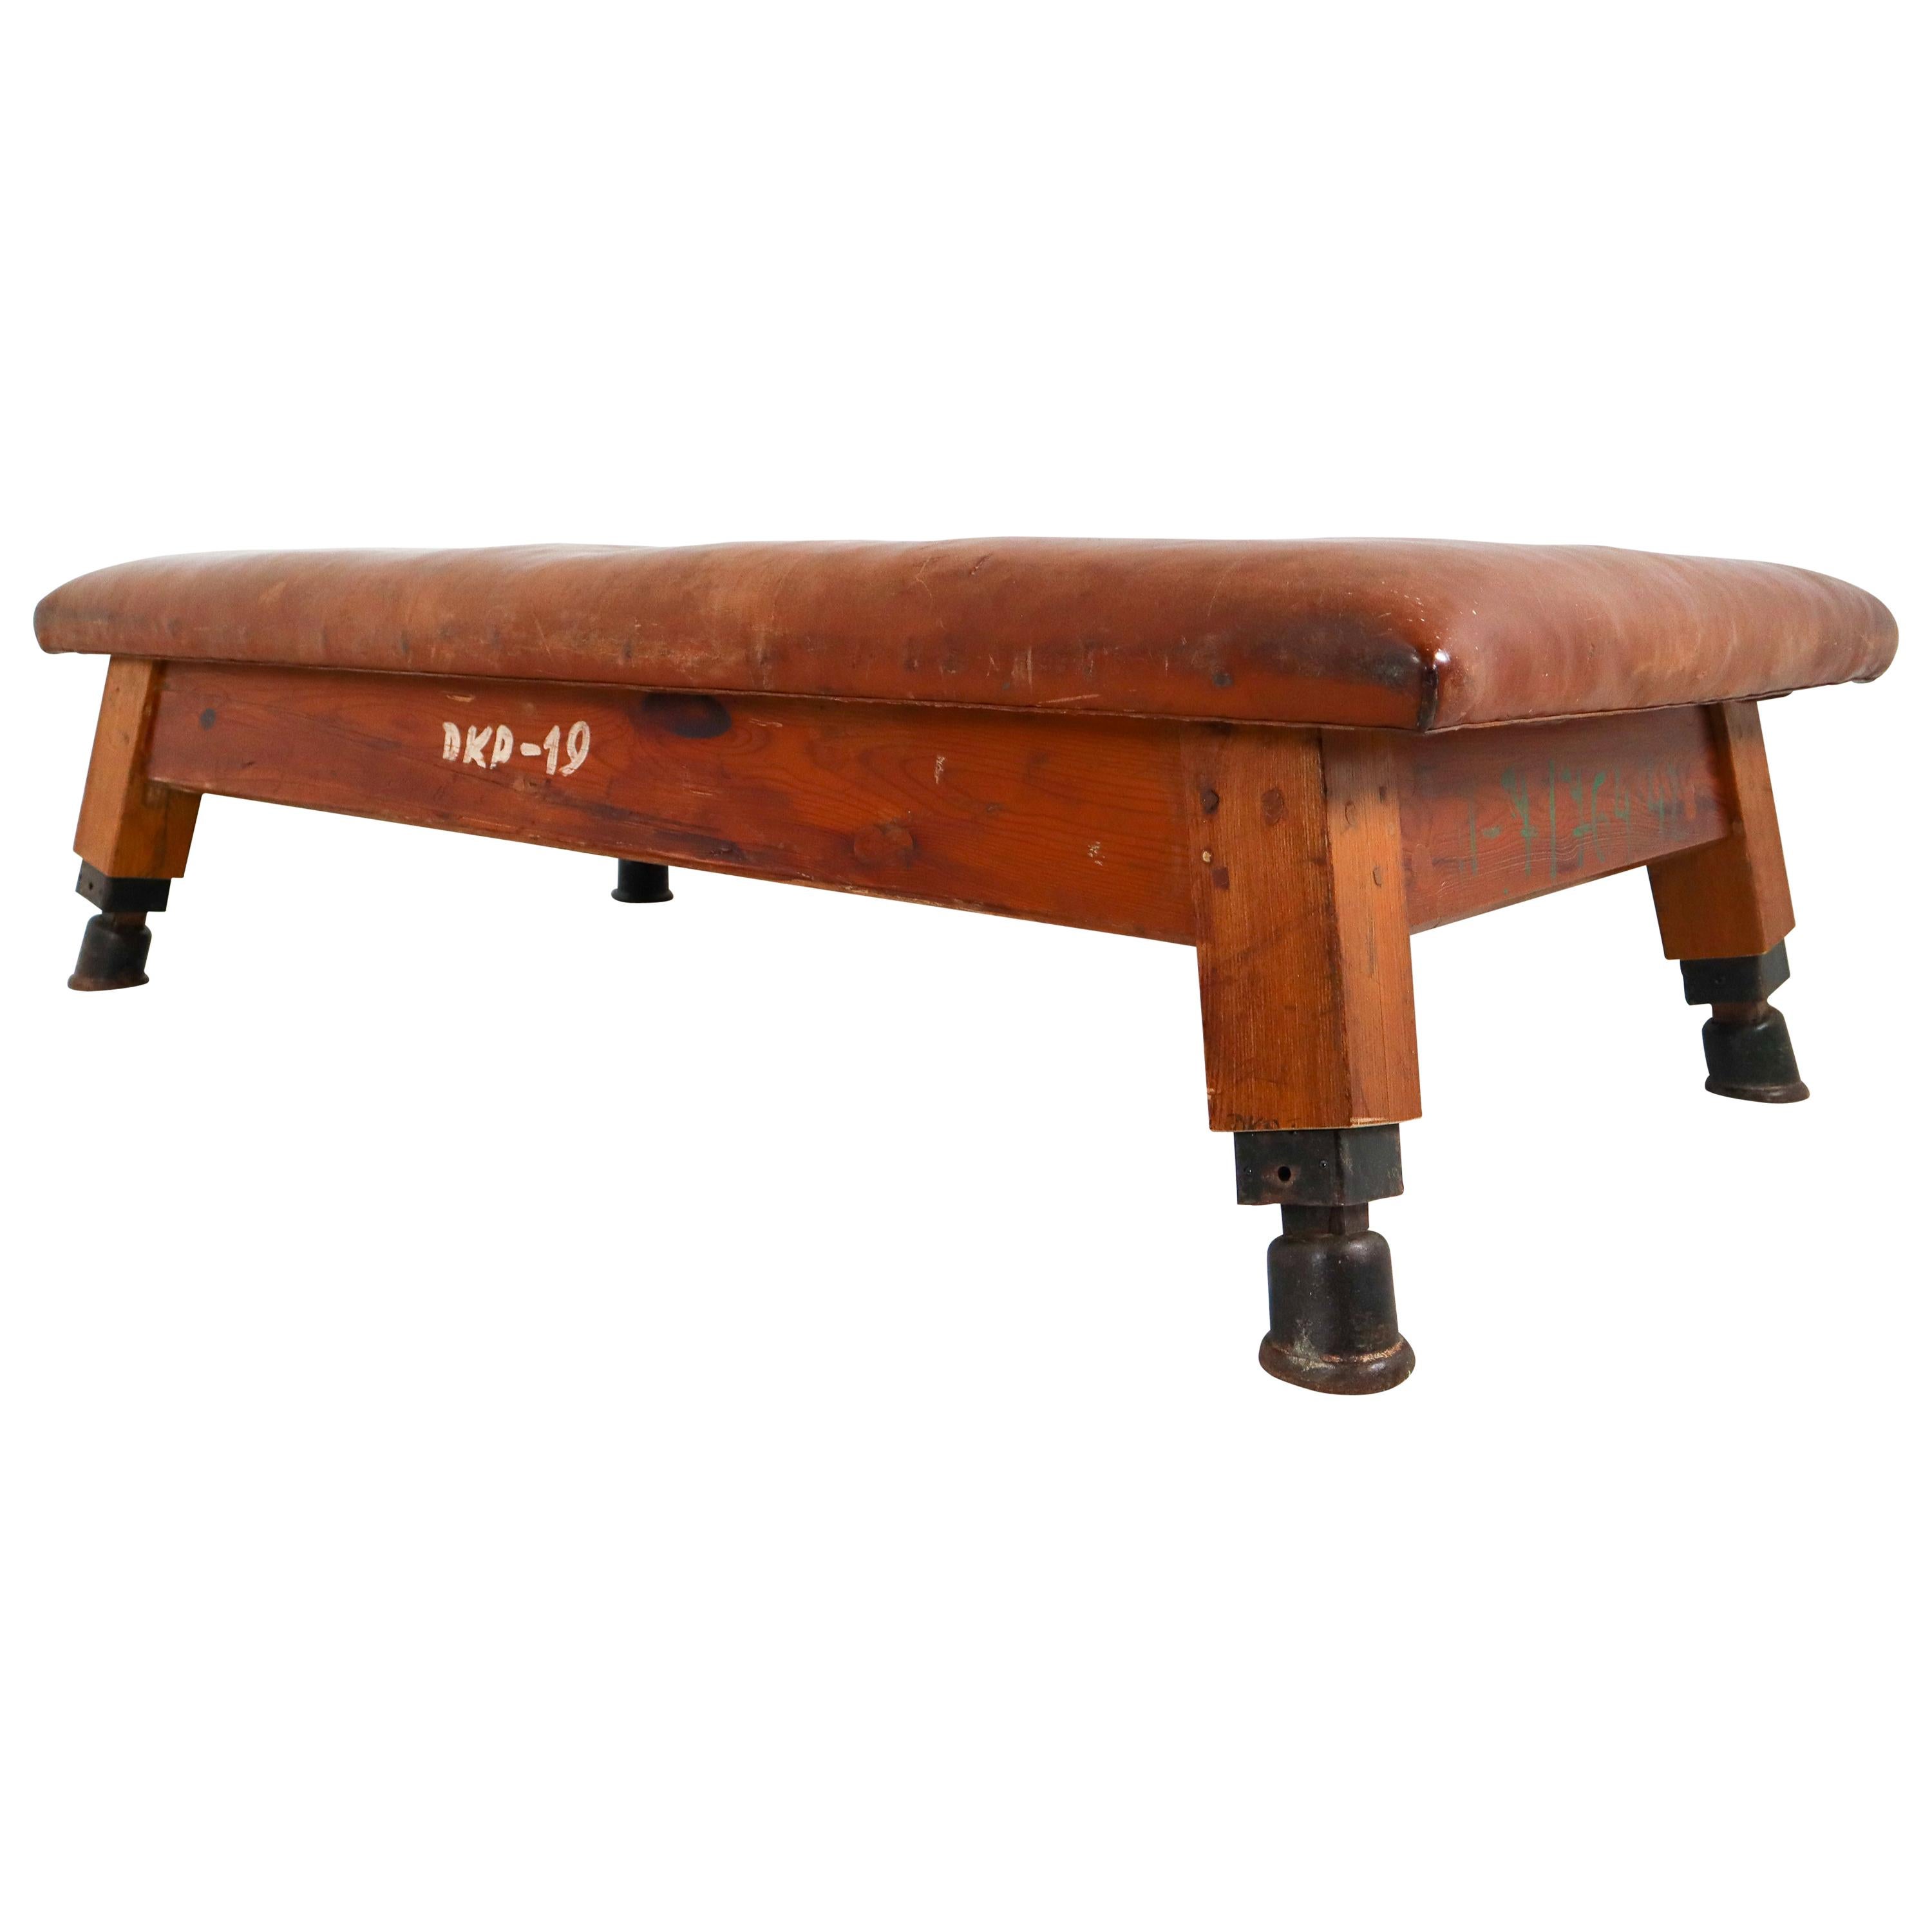 Vintage Patinated Leather Gym Bench or Table, circa 1940